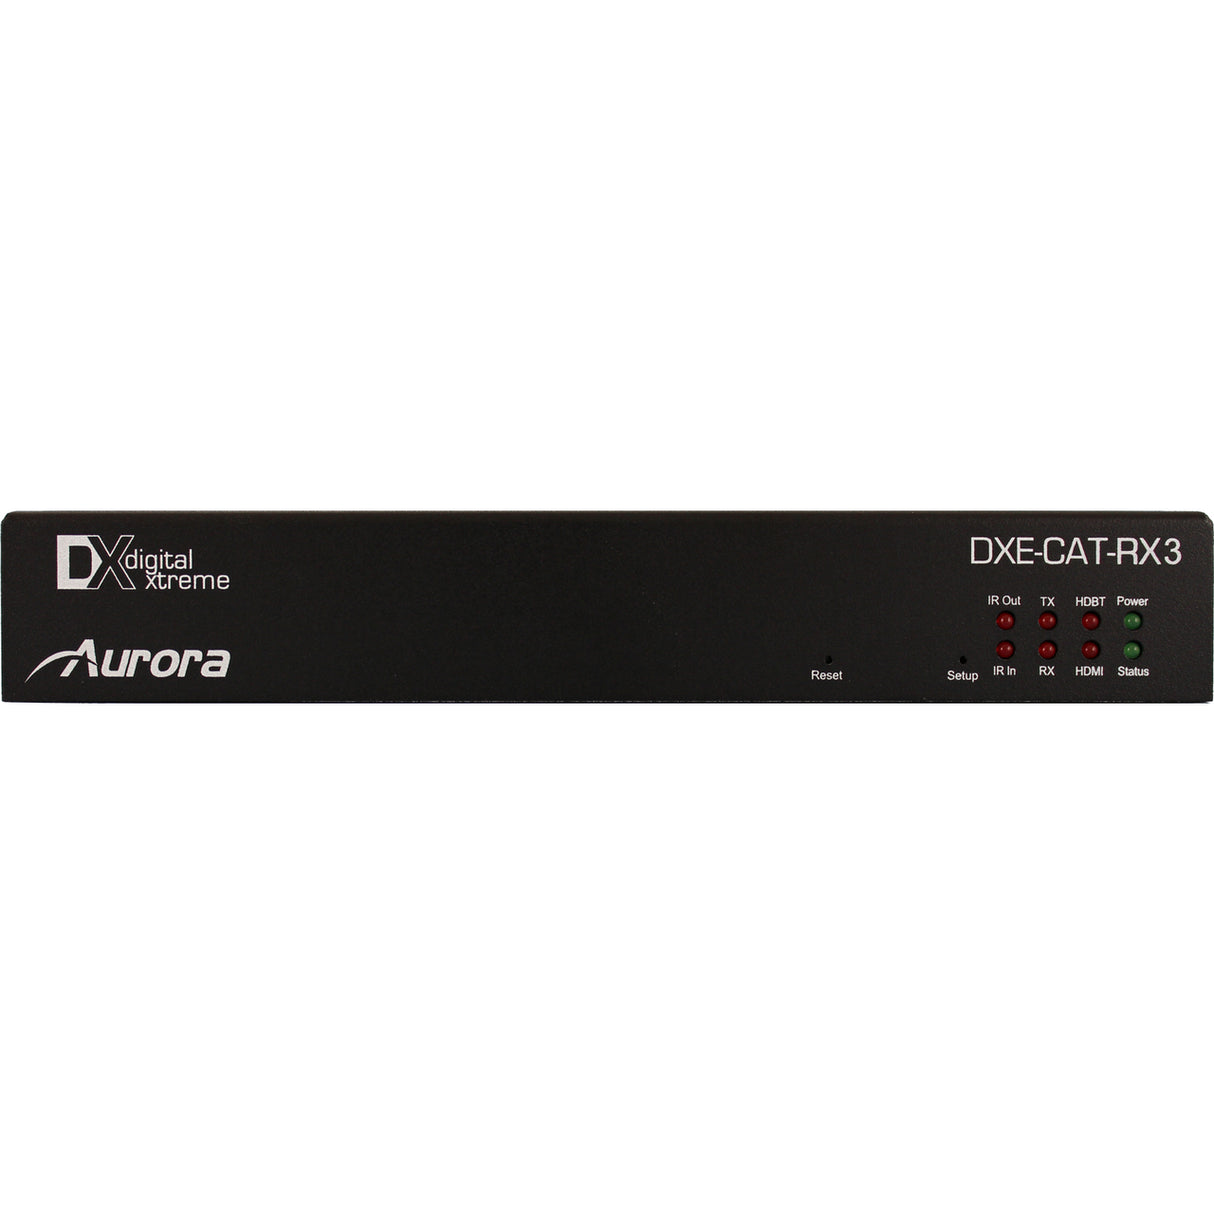 Aurora DXE-CAT-RX3 | HDBaseT Receiver with Dual Relay Power Supply